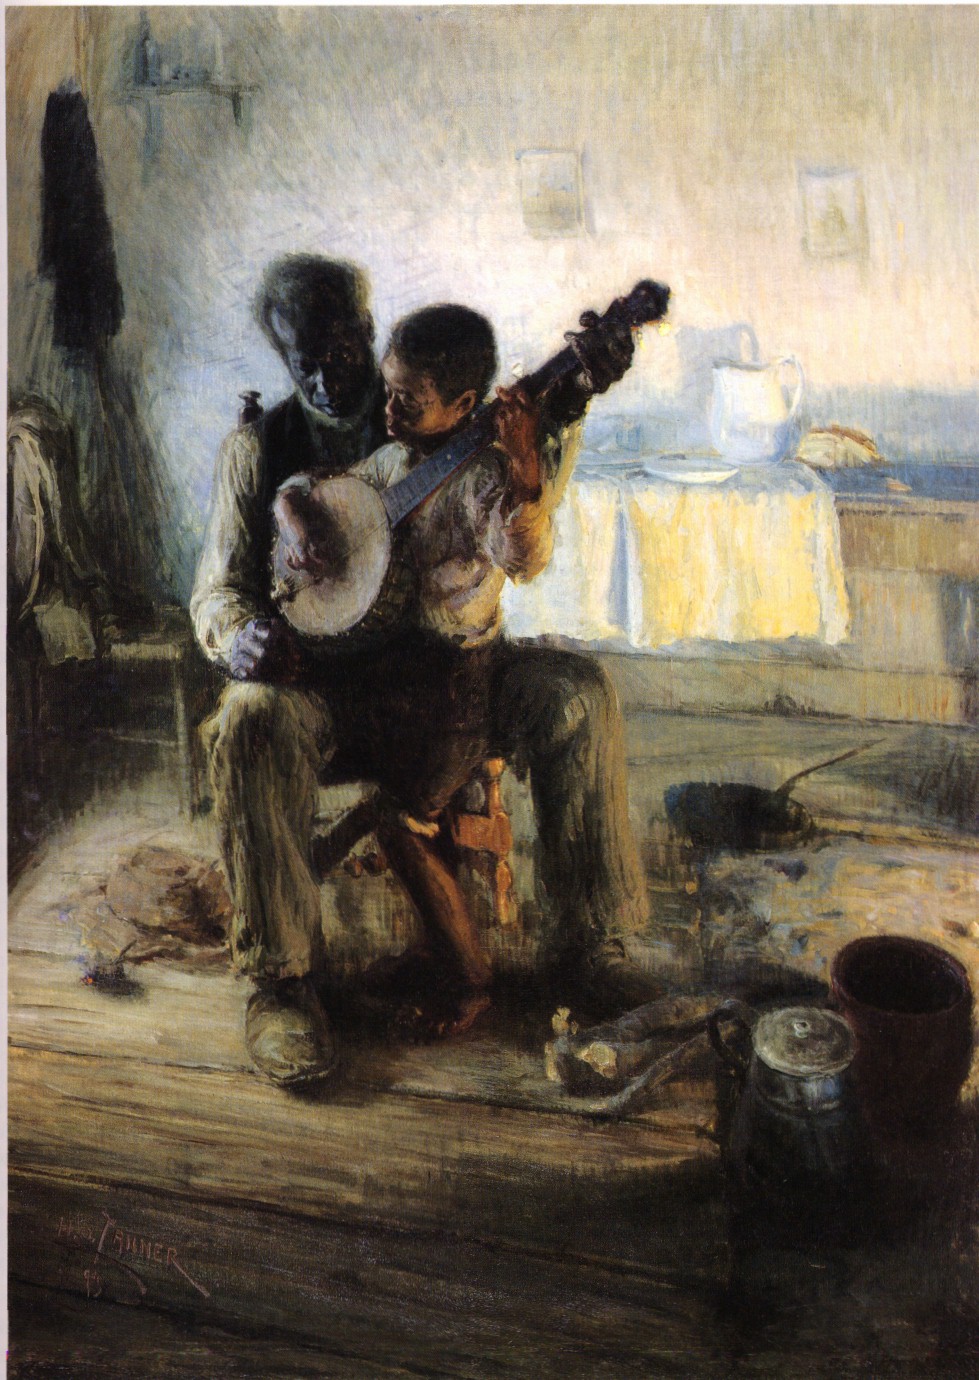 Henry Ossawa Tanner's "The Banjo Lesson"